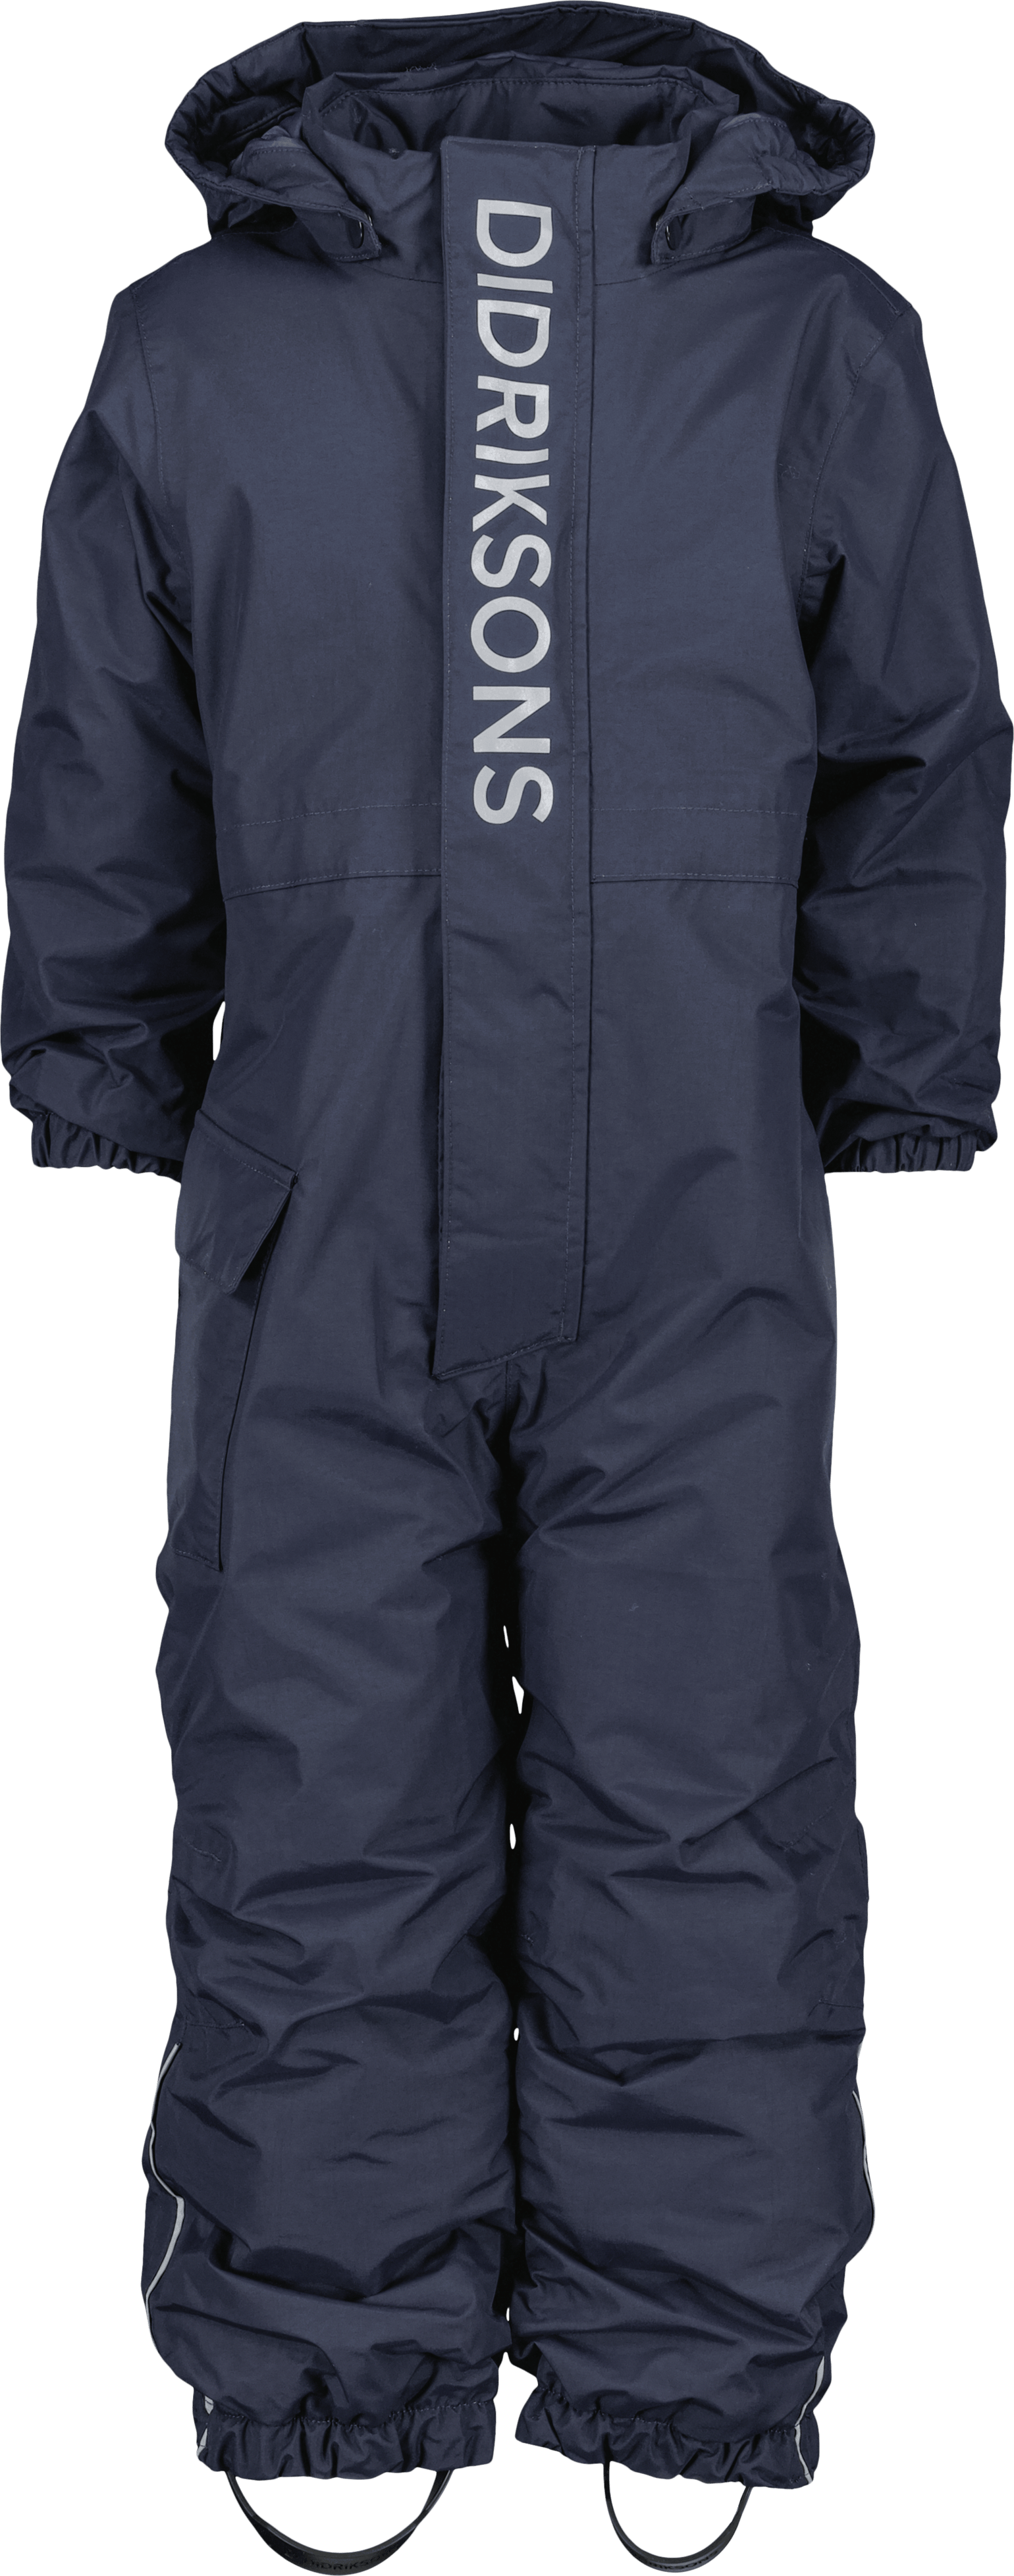 Kids' Rio Coverall 2 Navy